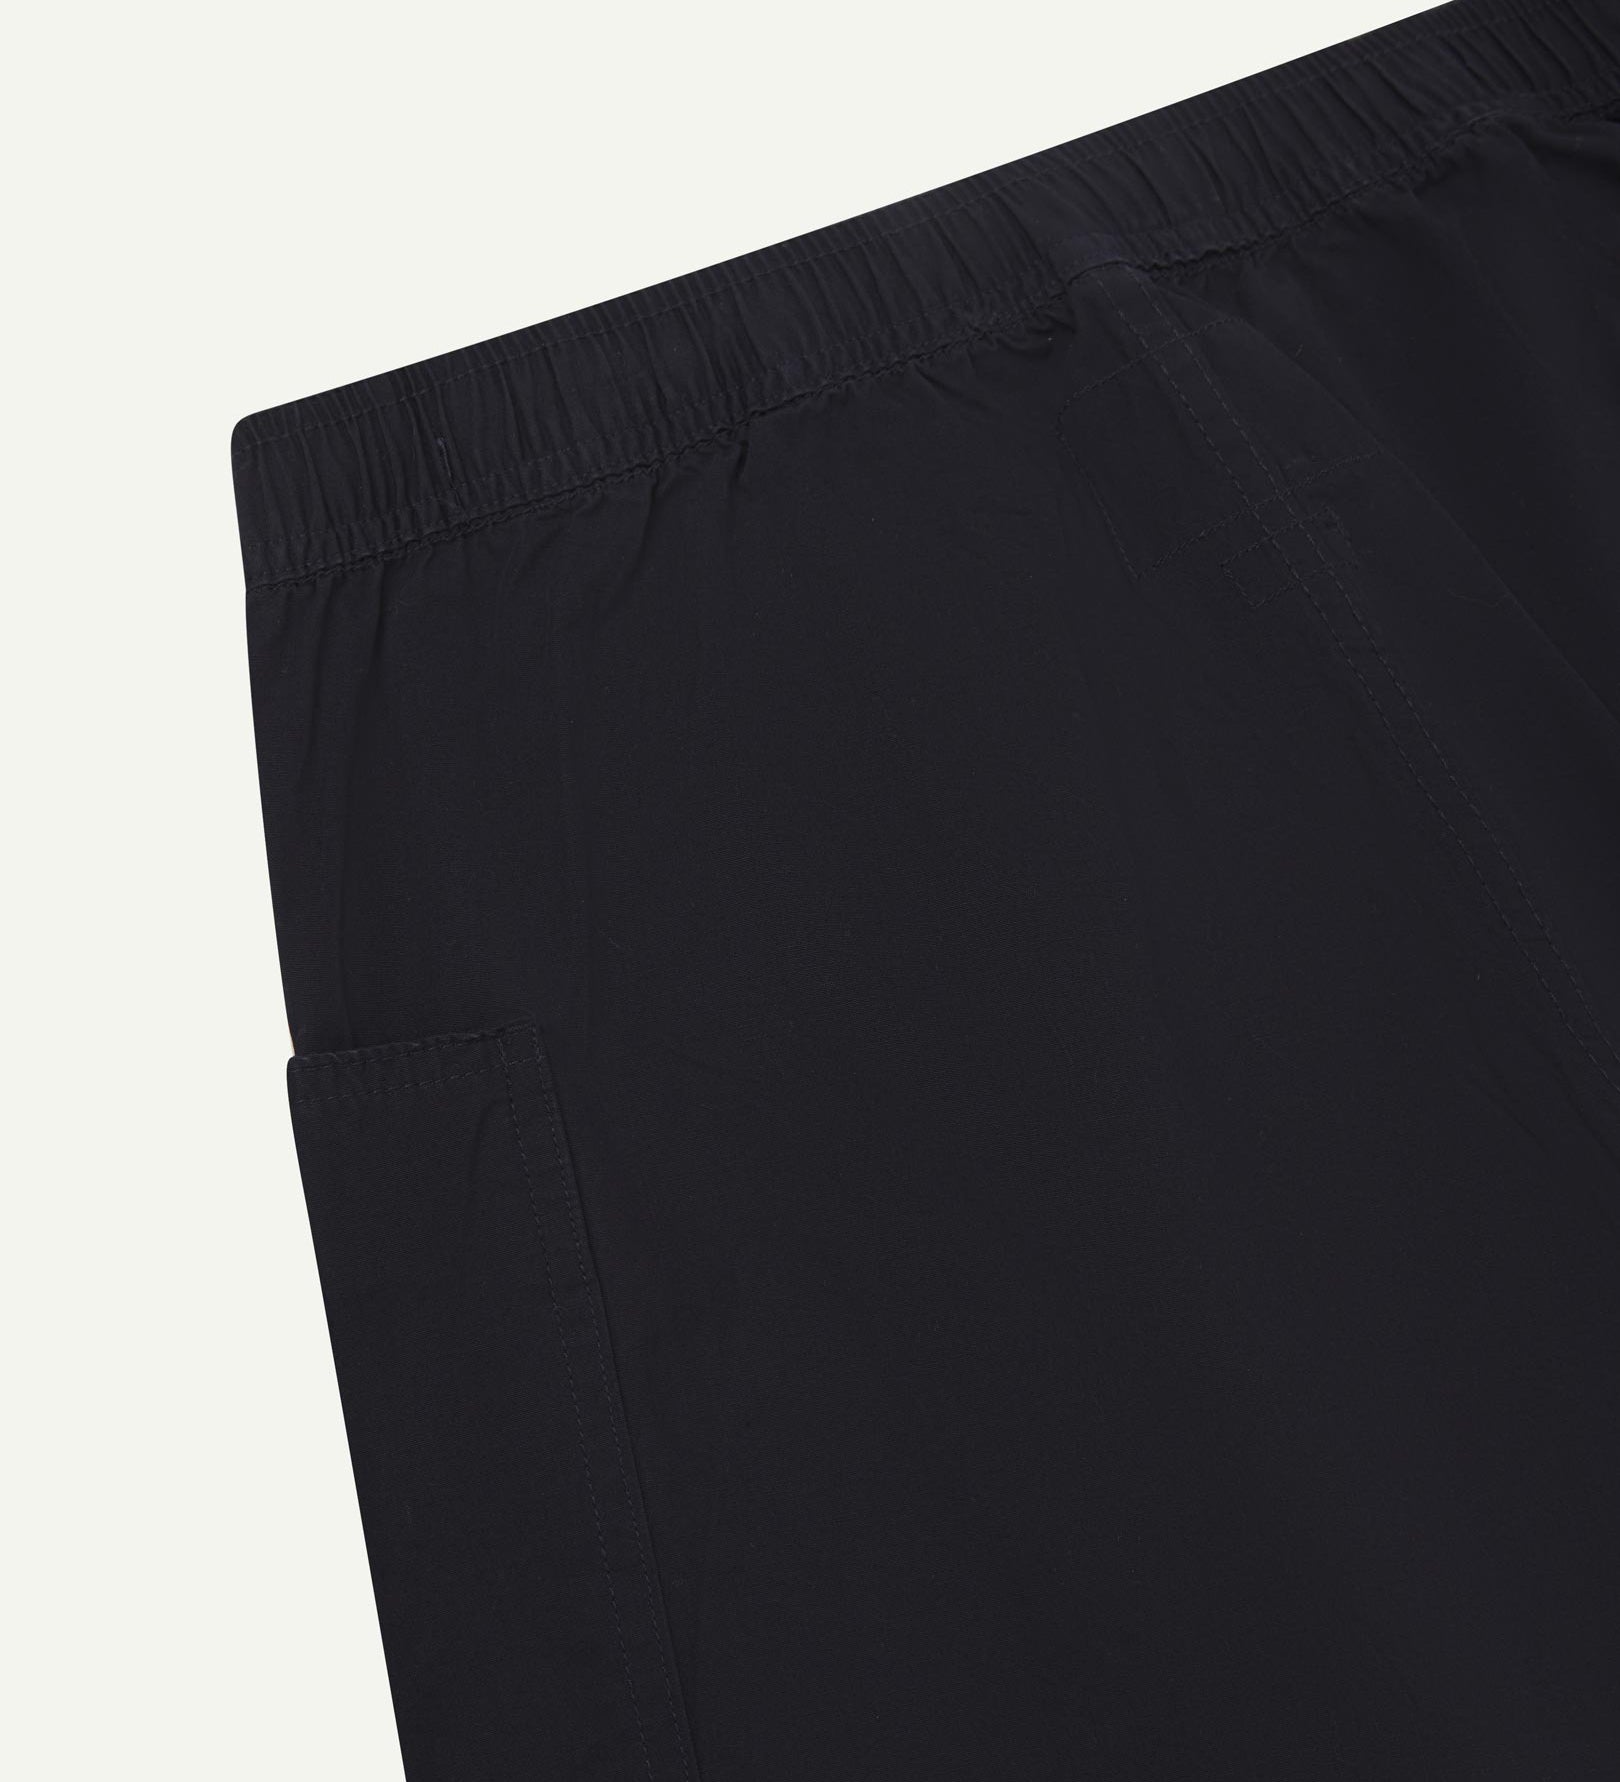 Close-up of the back of the lightweight organic midnight blue green cotton pants showing the elasticated waist.